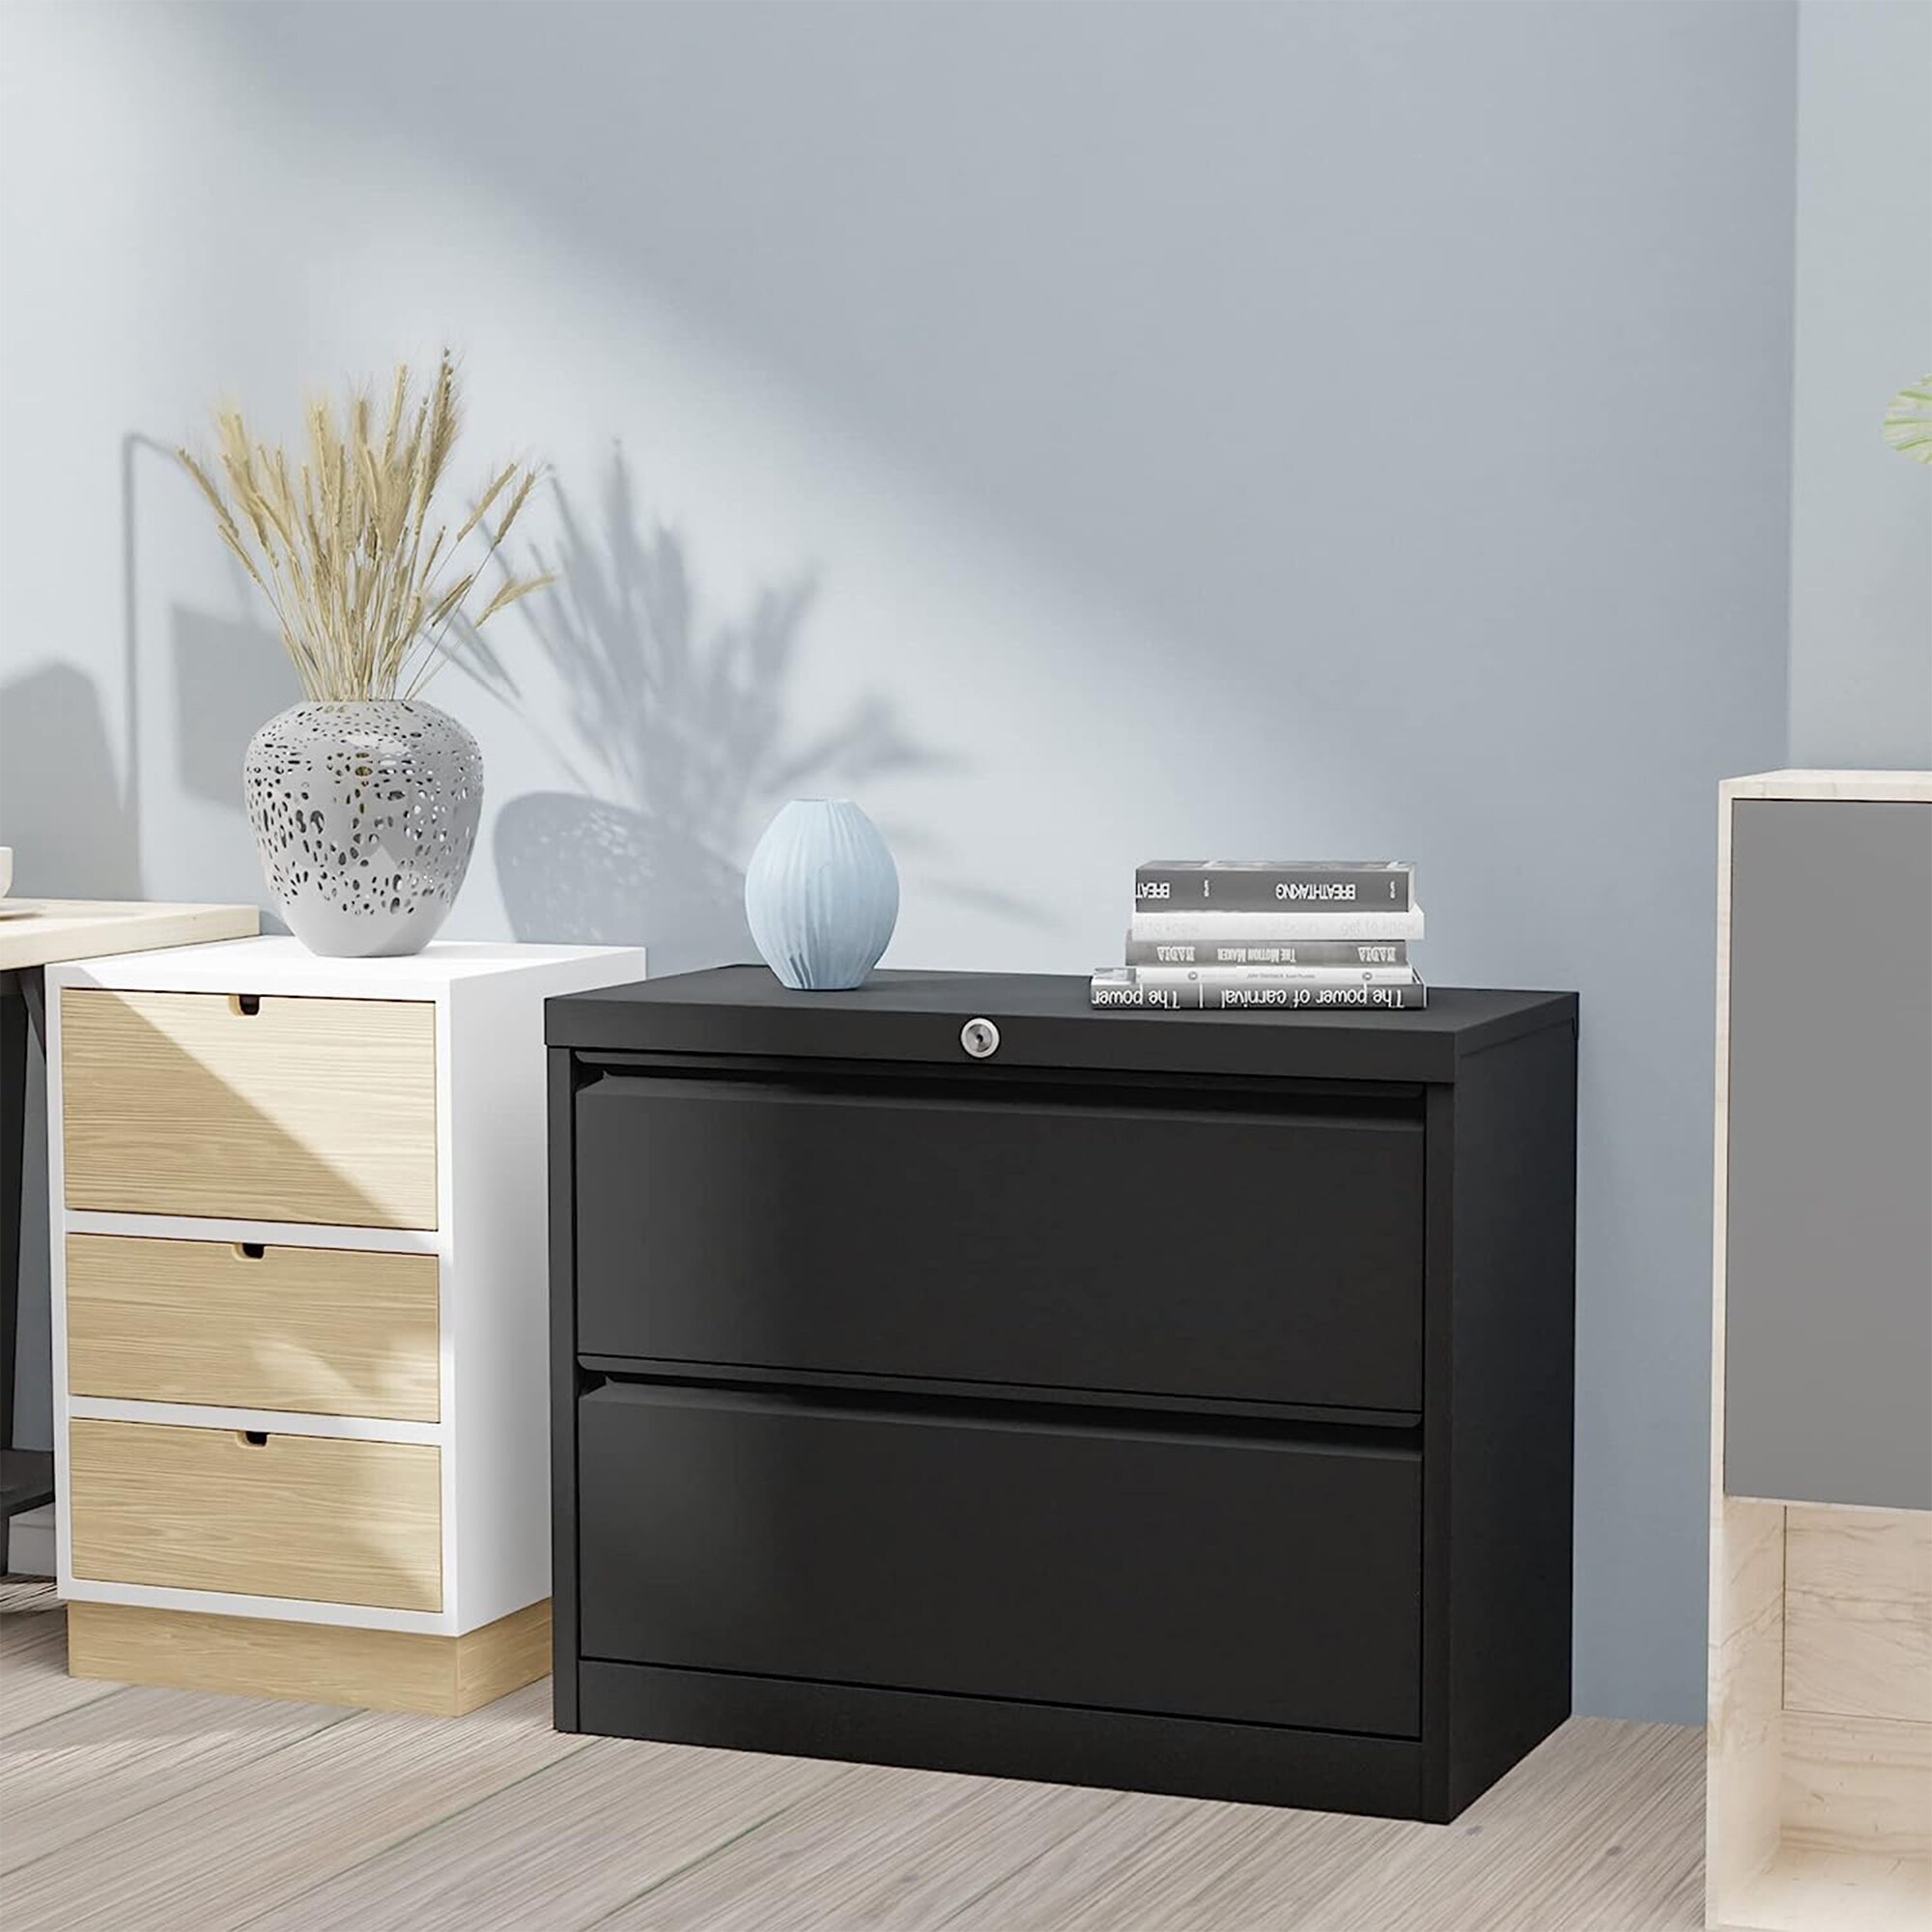 https://ak1.ostkcdn.com/images/products/is/images/direct/0878add6084227138b48031cc17d696917cf8293/AOBABO-35.43-Inch-Locking-2-Drawer-Metal-Office-Storage-Filing-Cabinet%2C-Black.jpg